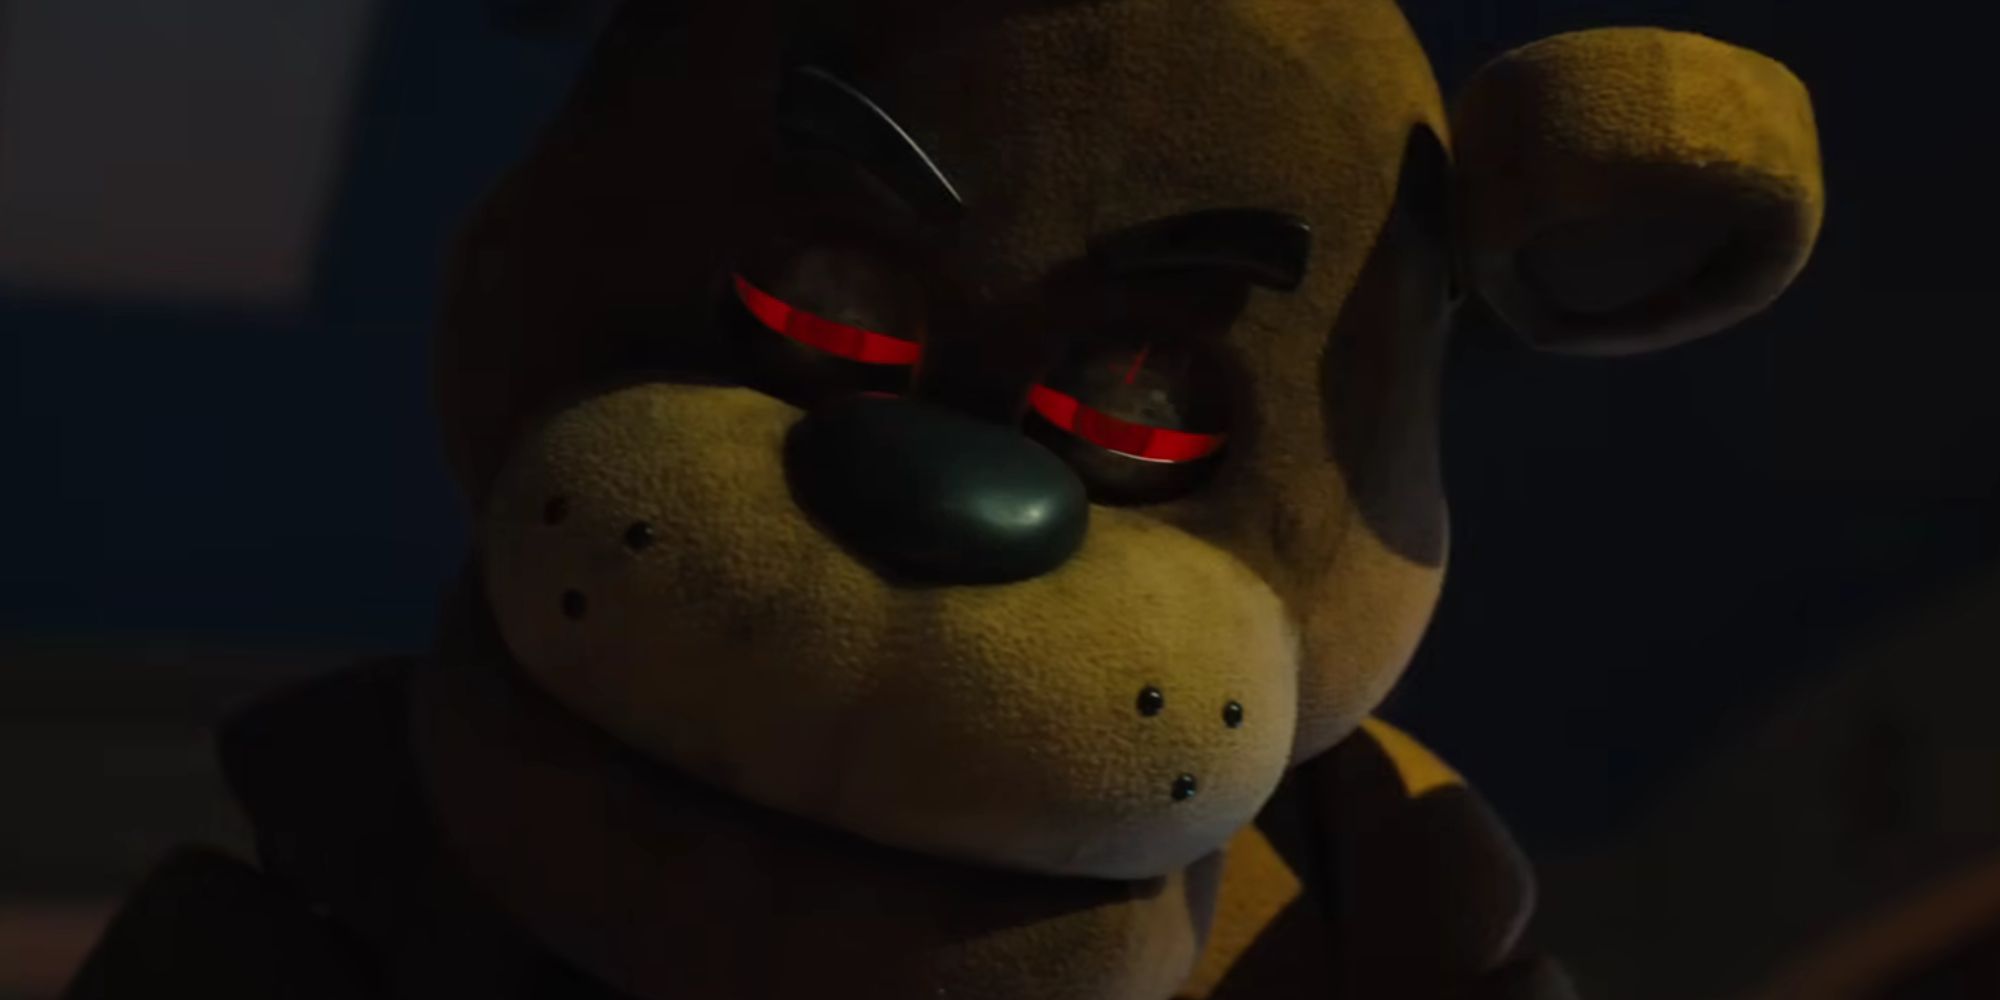 Unfinished Five Nights at Freddy's Movie Trailer Leaks Online